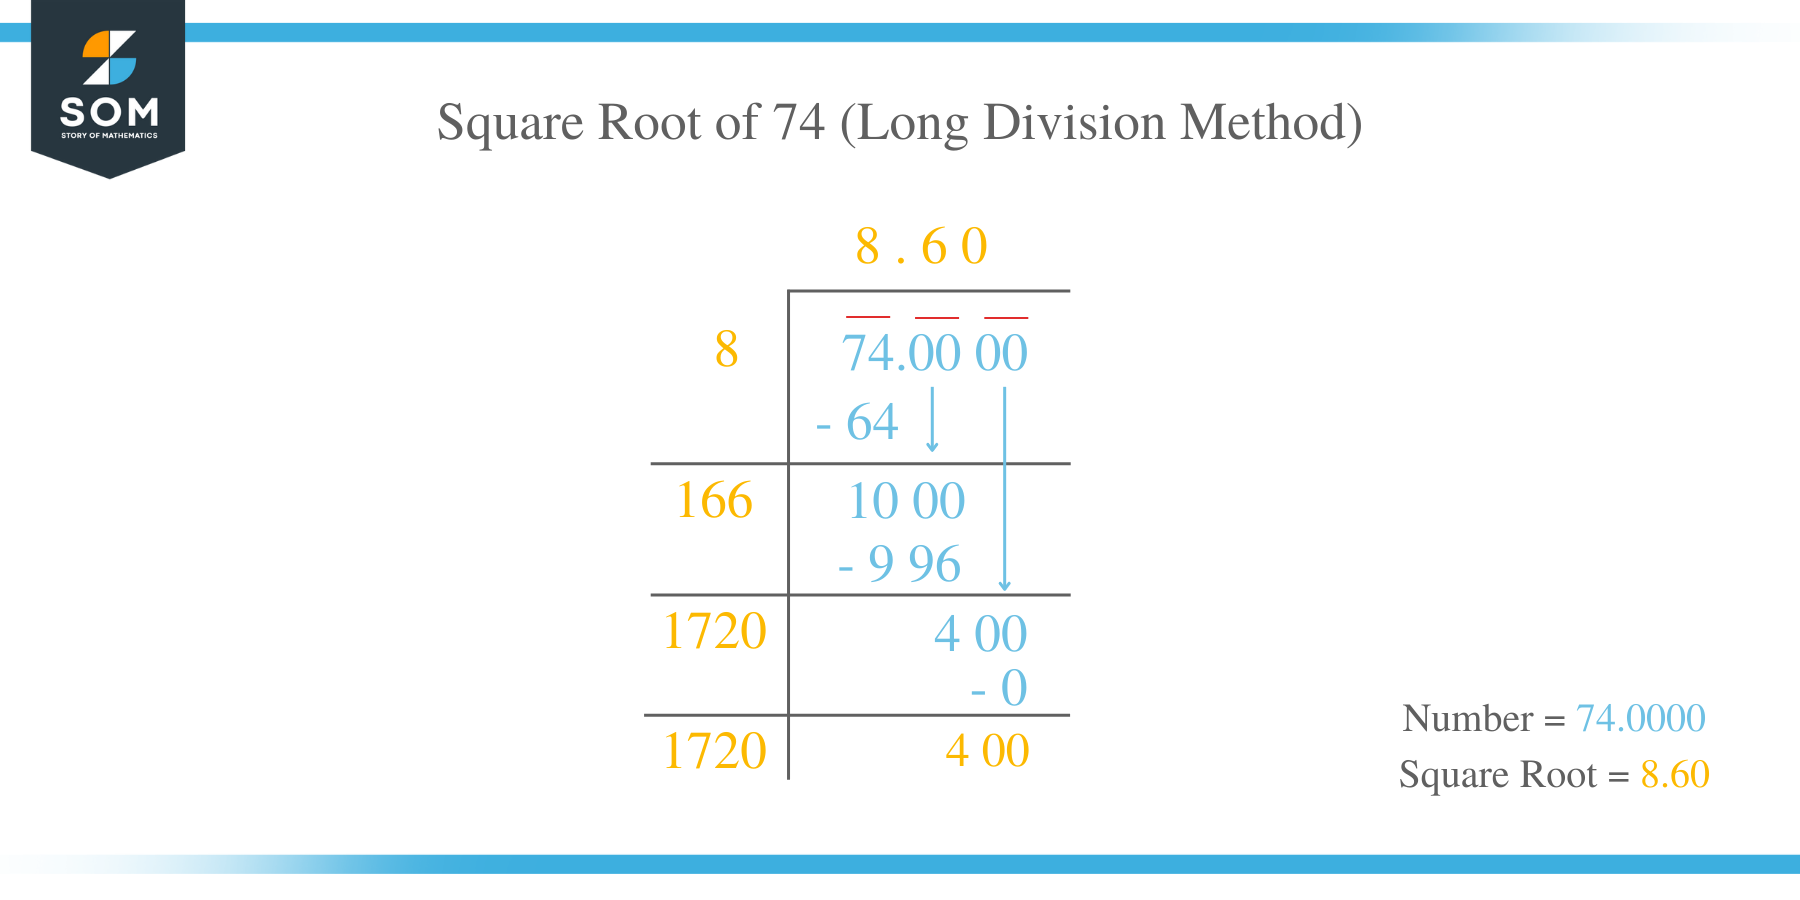 Square Root of 74 by Long Division Method